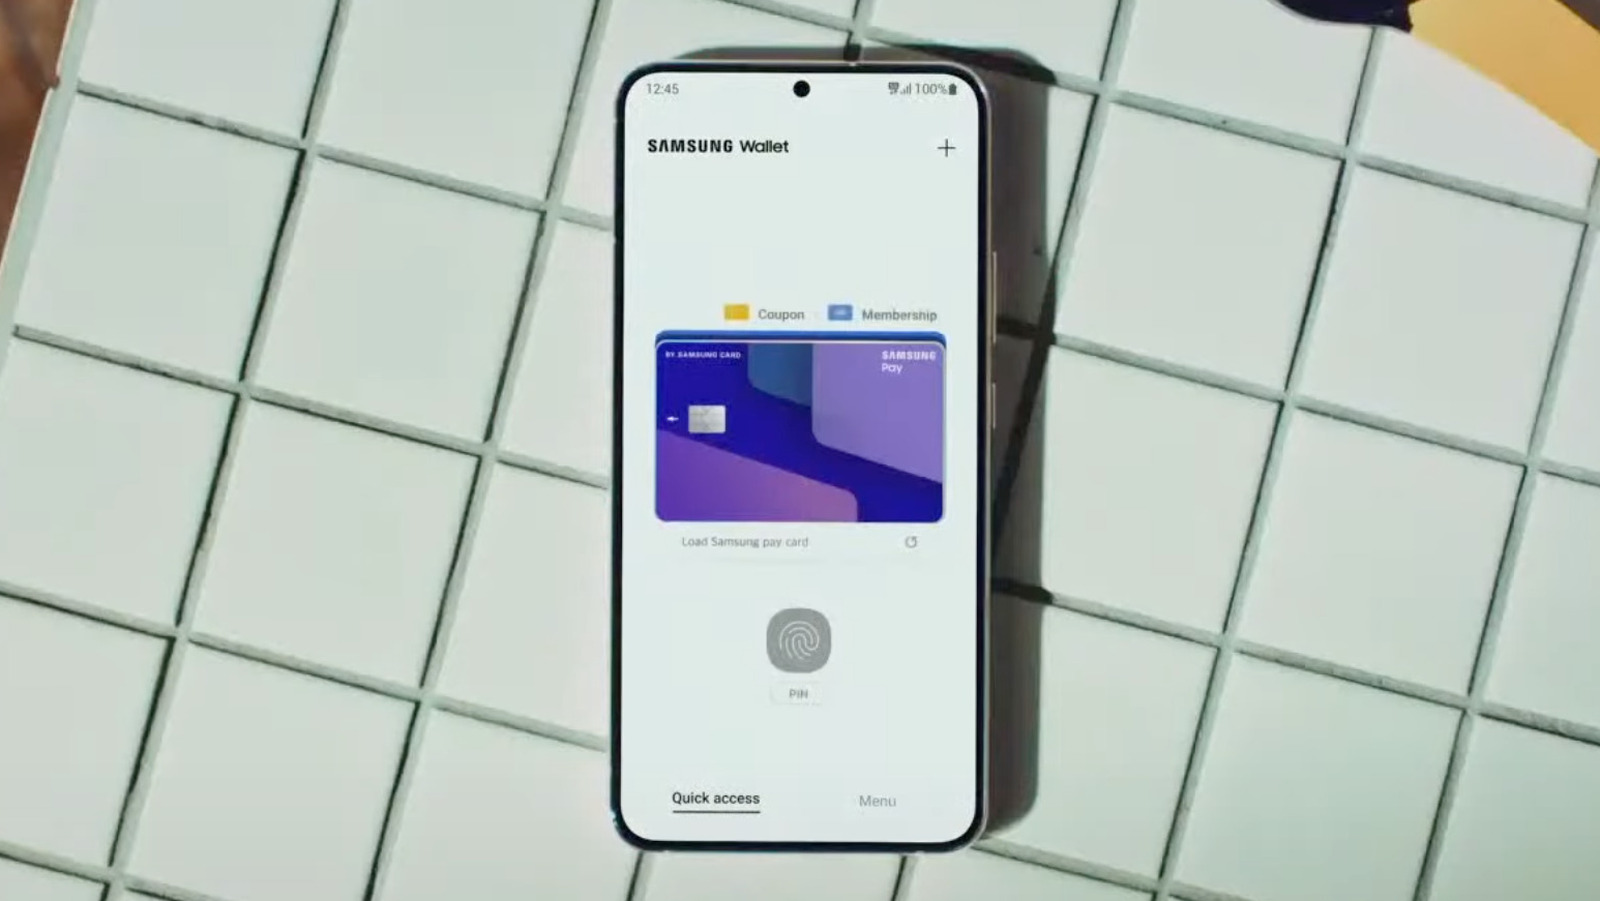 https://www.slashgear.com/img/gallery/new-samsung-wallet-launched-heres-what-you-get/l-intro-1655228495.jpg